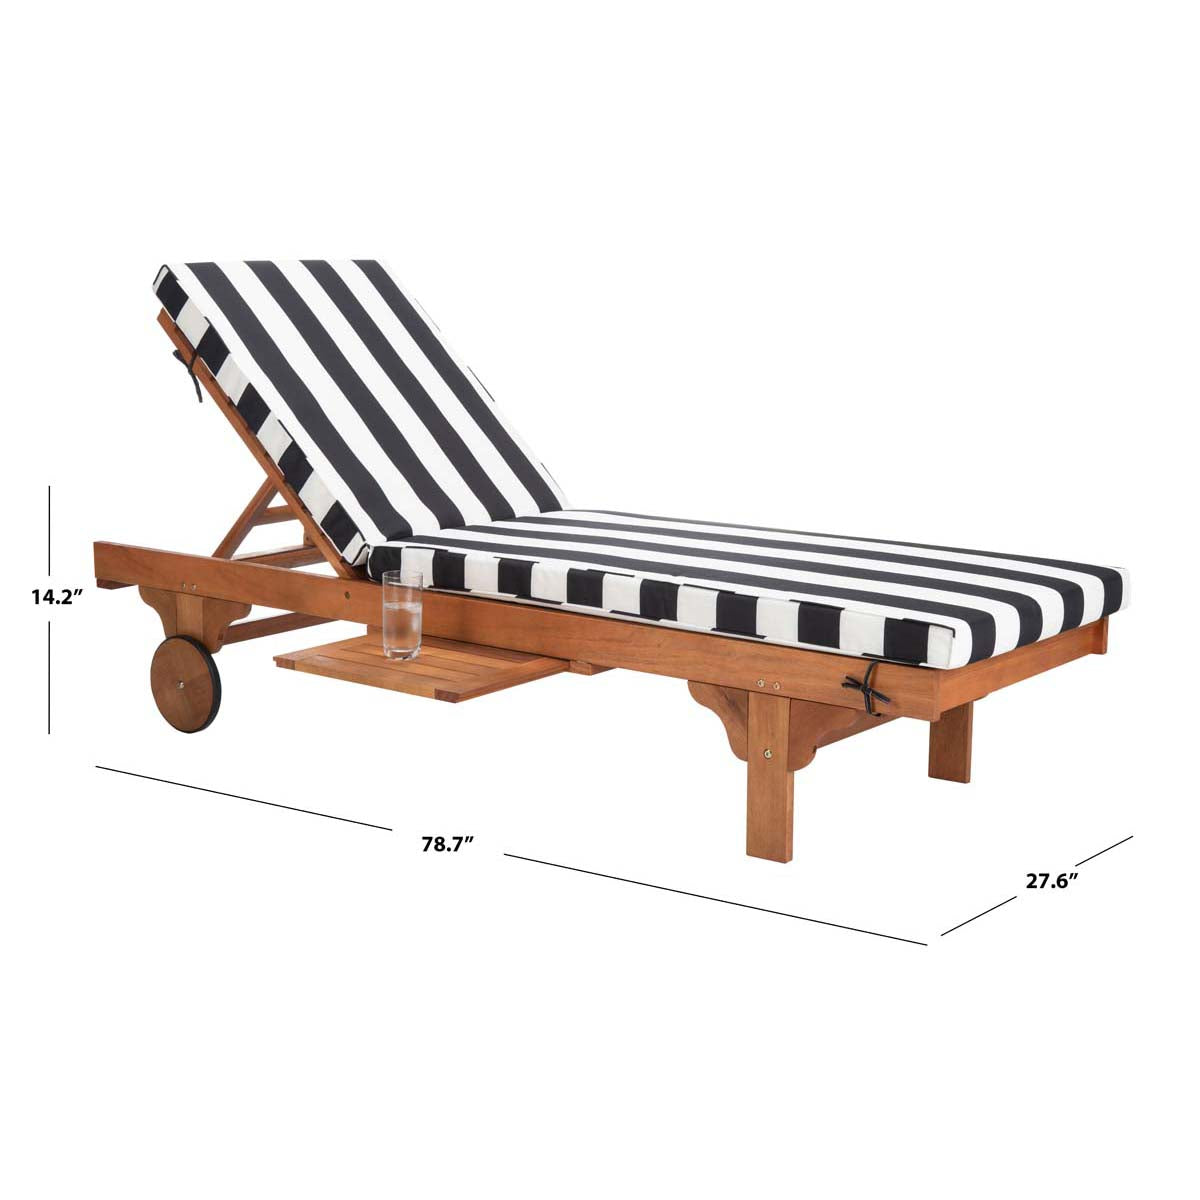 Safavieh Newport Chaise Lounge Chair With Side Table , PAT7022